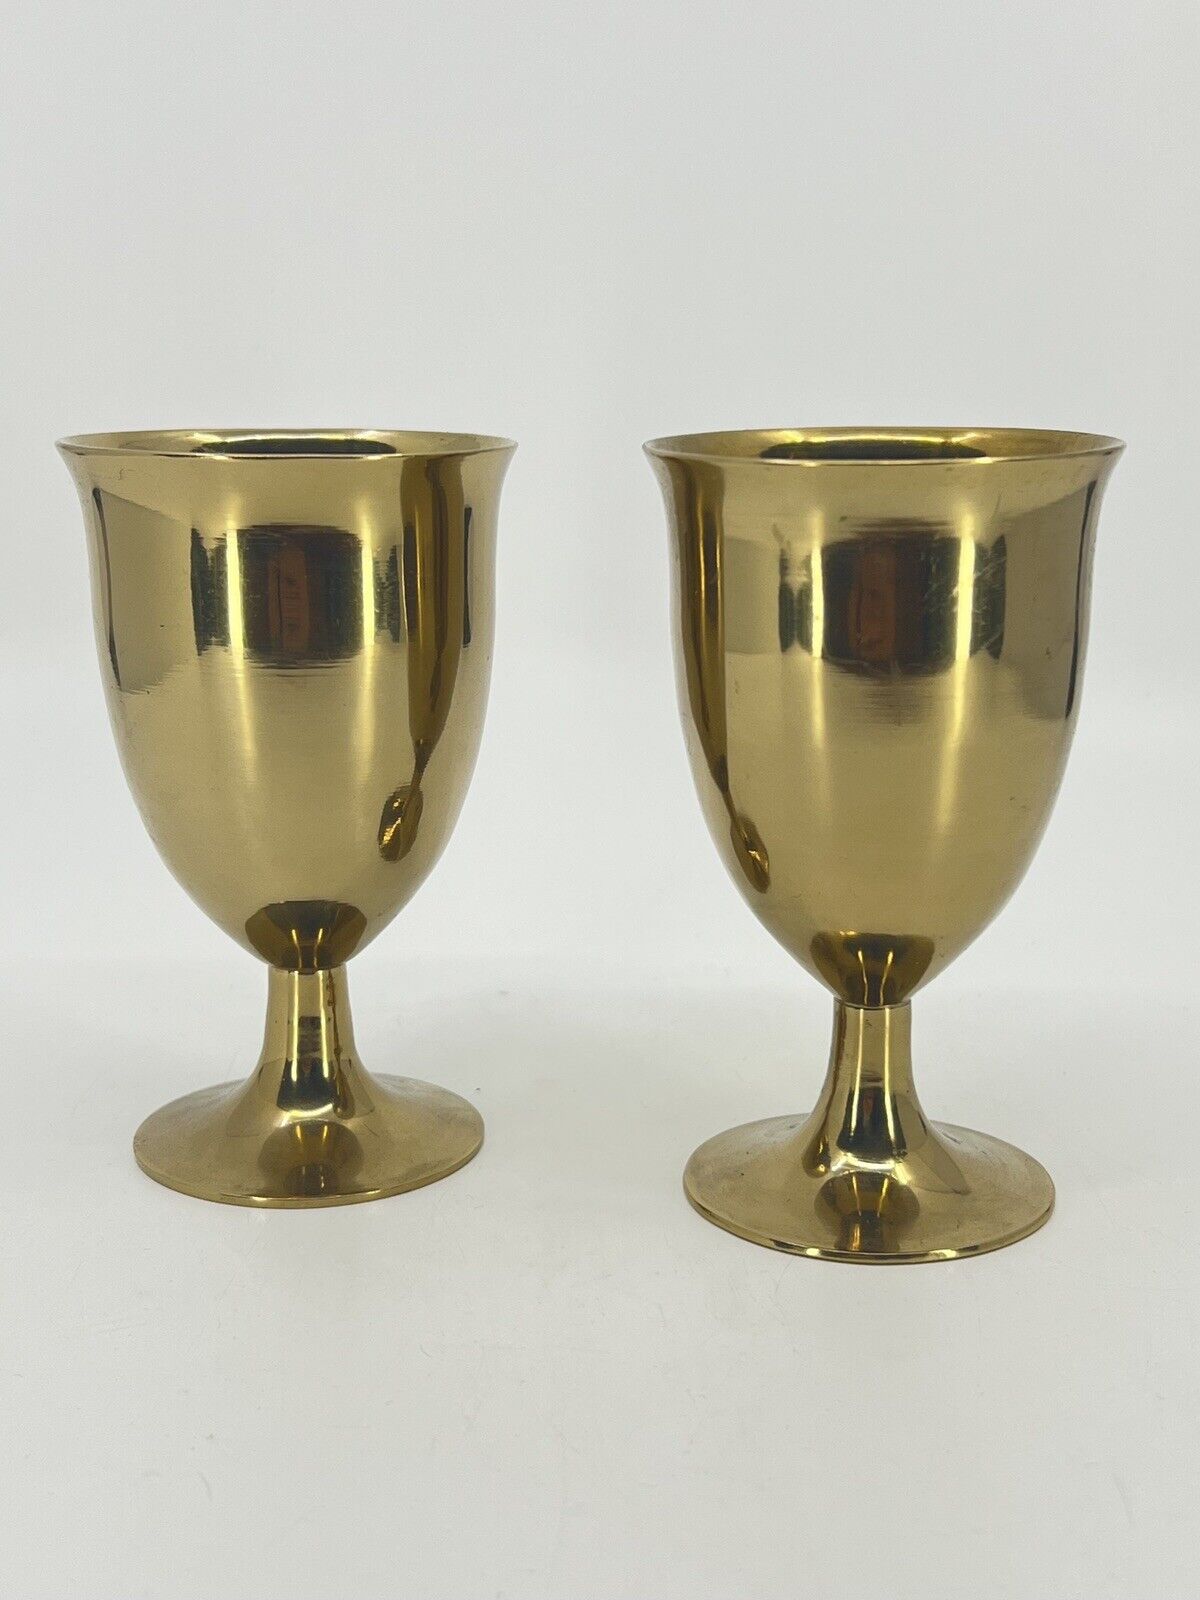 2 Vintage Communion Cups Brass / Silver plate From Korea Wedding Religious Event